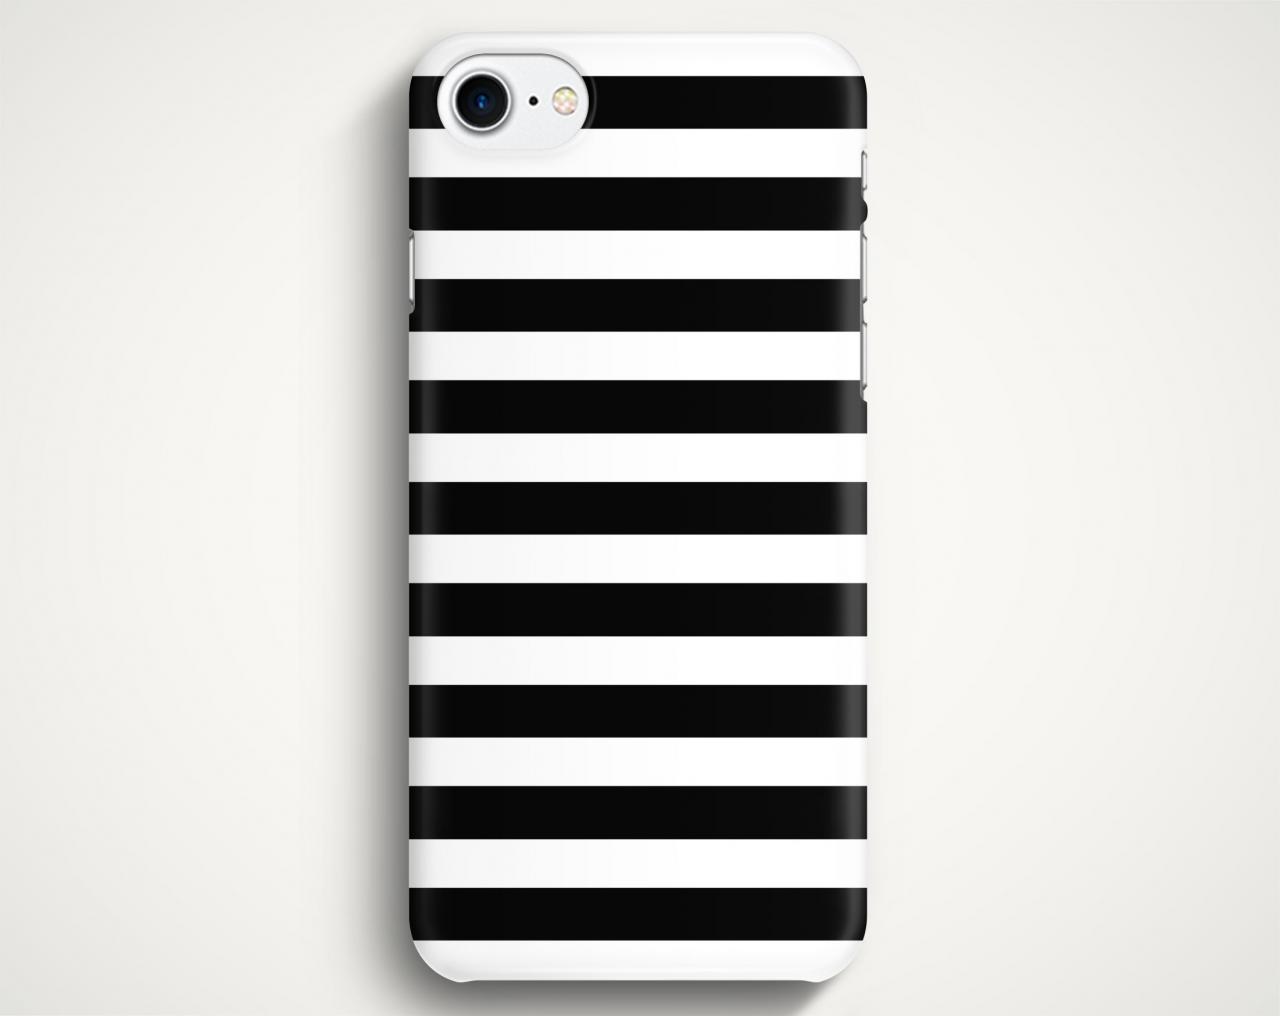 Black Stripes Case For Iphone 7 Iphone 7 Plus Samsung Galaxy S8 Galaxy S7 Galaxy A3 Galaxy A5 Galaxy A7 Lg G6 Lg G5 Htc 10